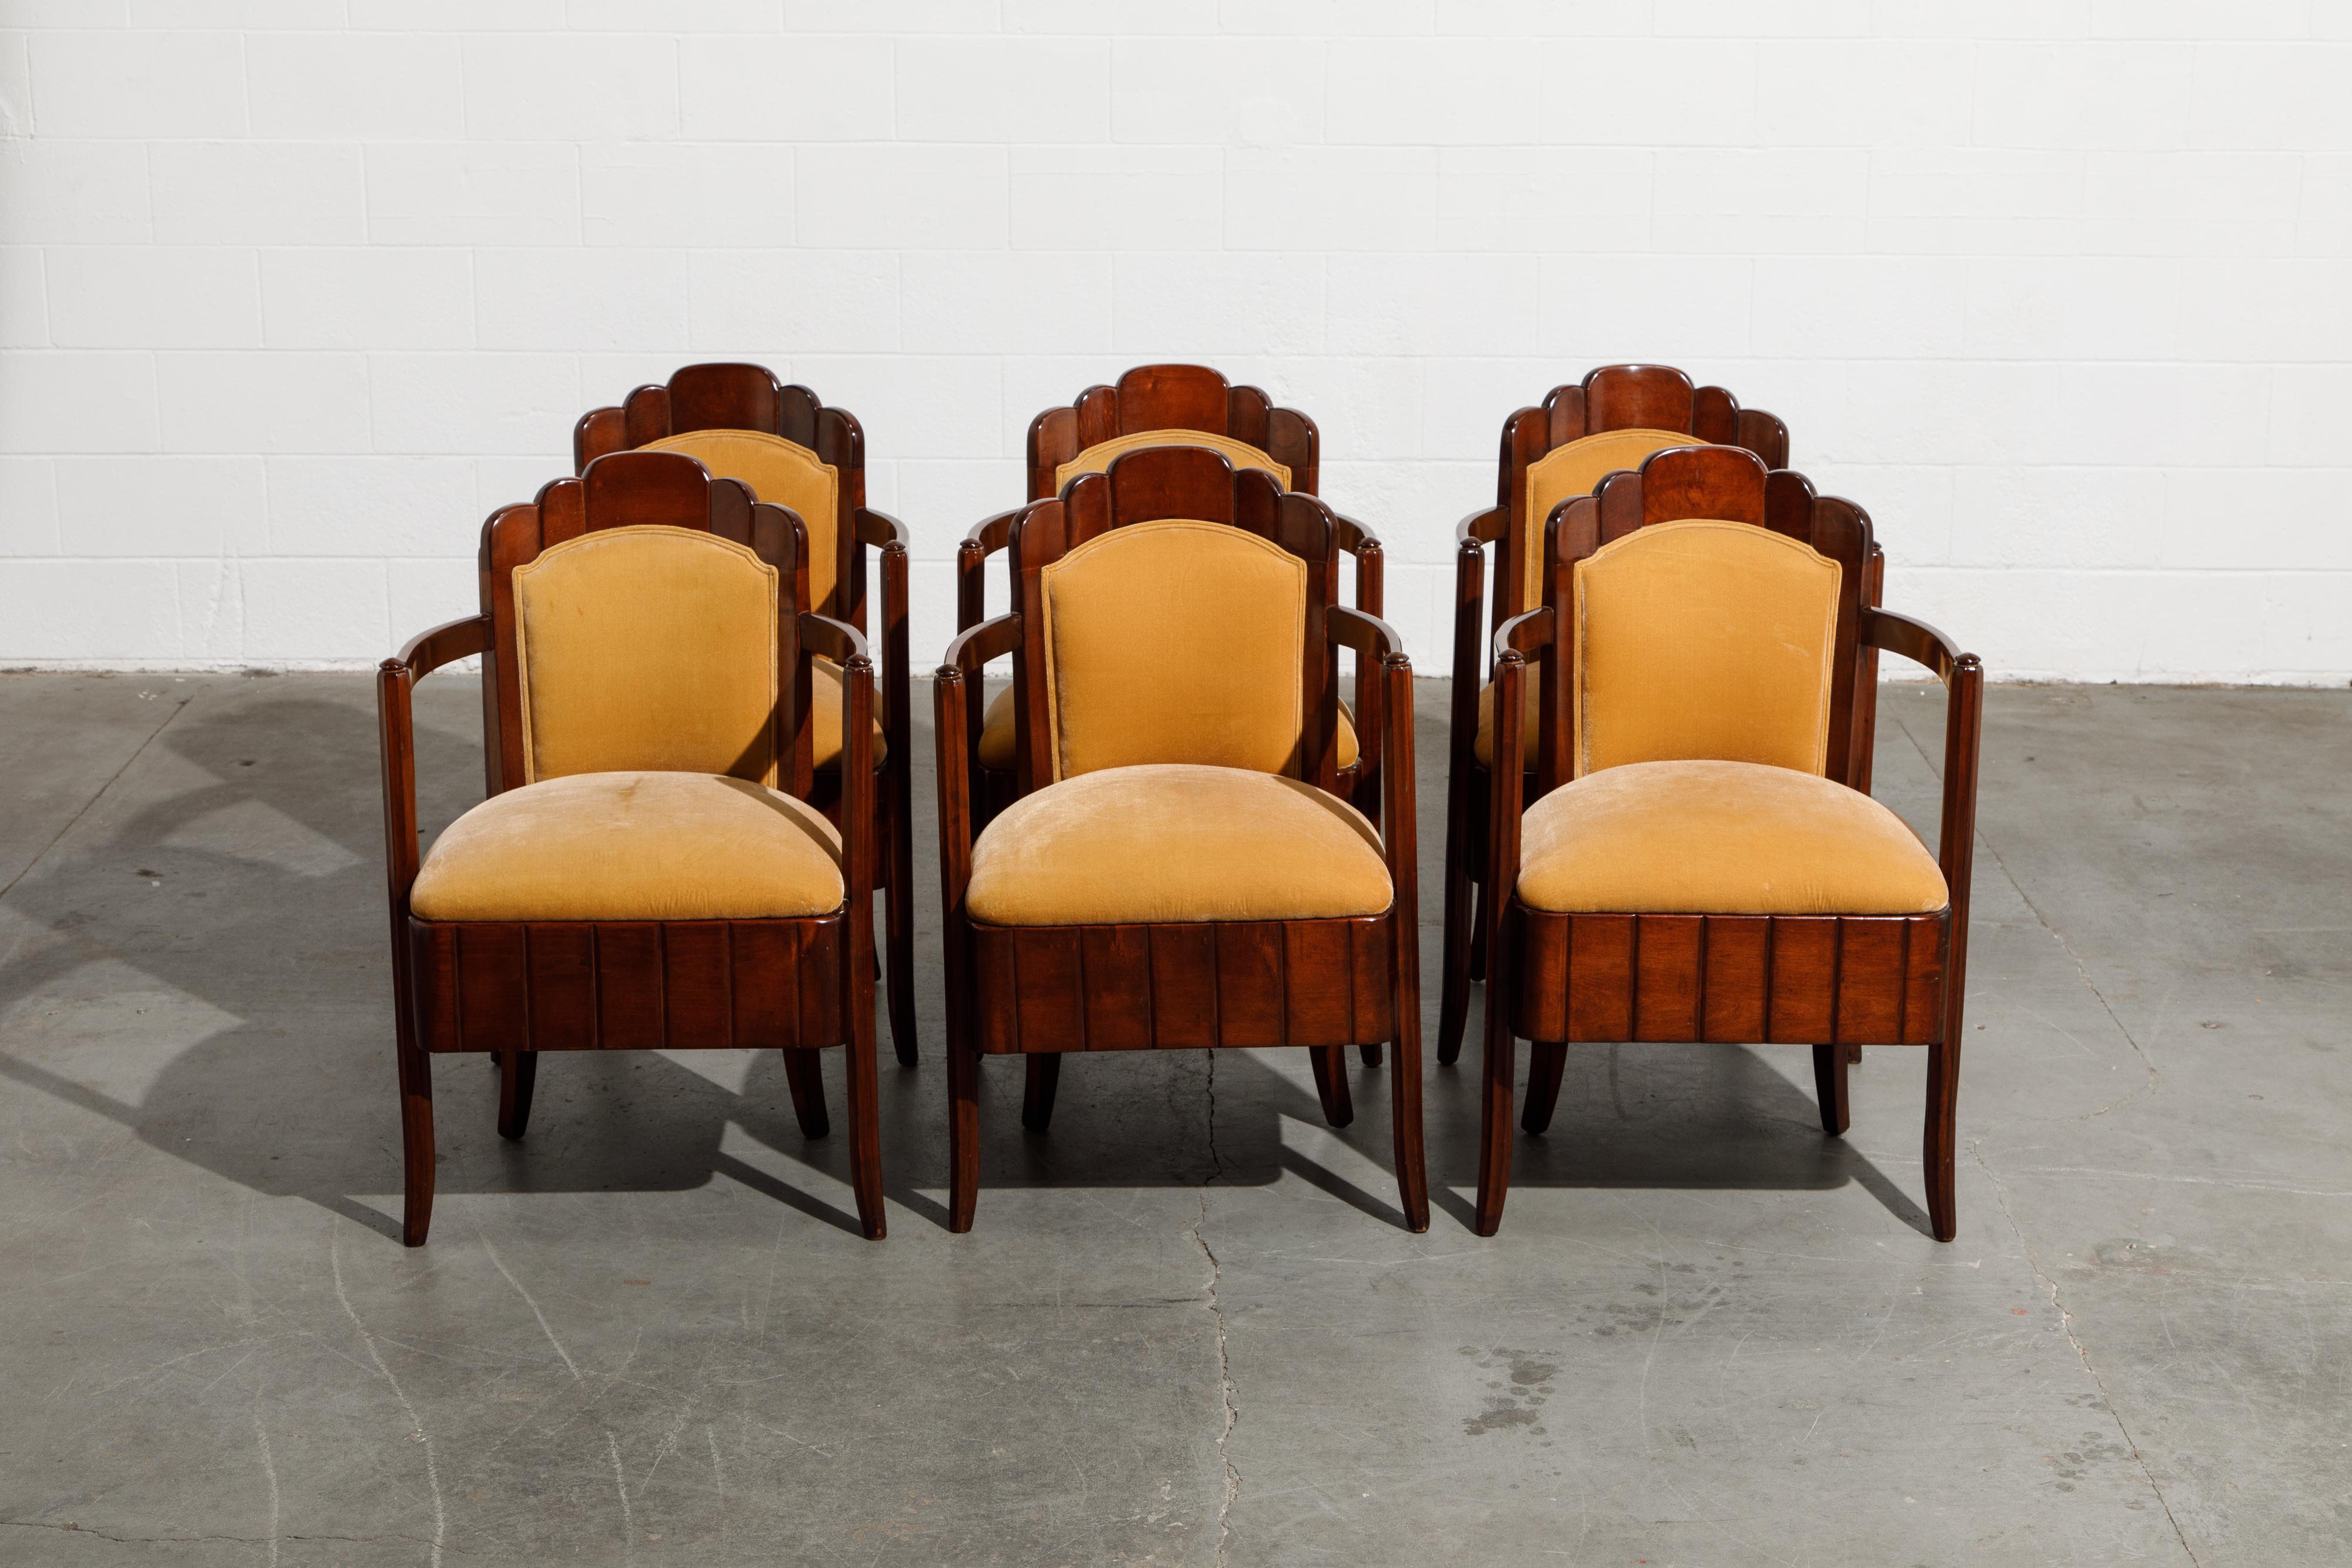 French Important Pierre Patout Mahogany Dining Chairs from S.S. Île de France, c. 1927 For Sale